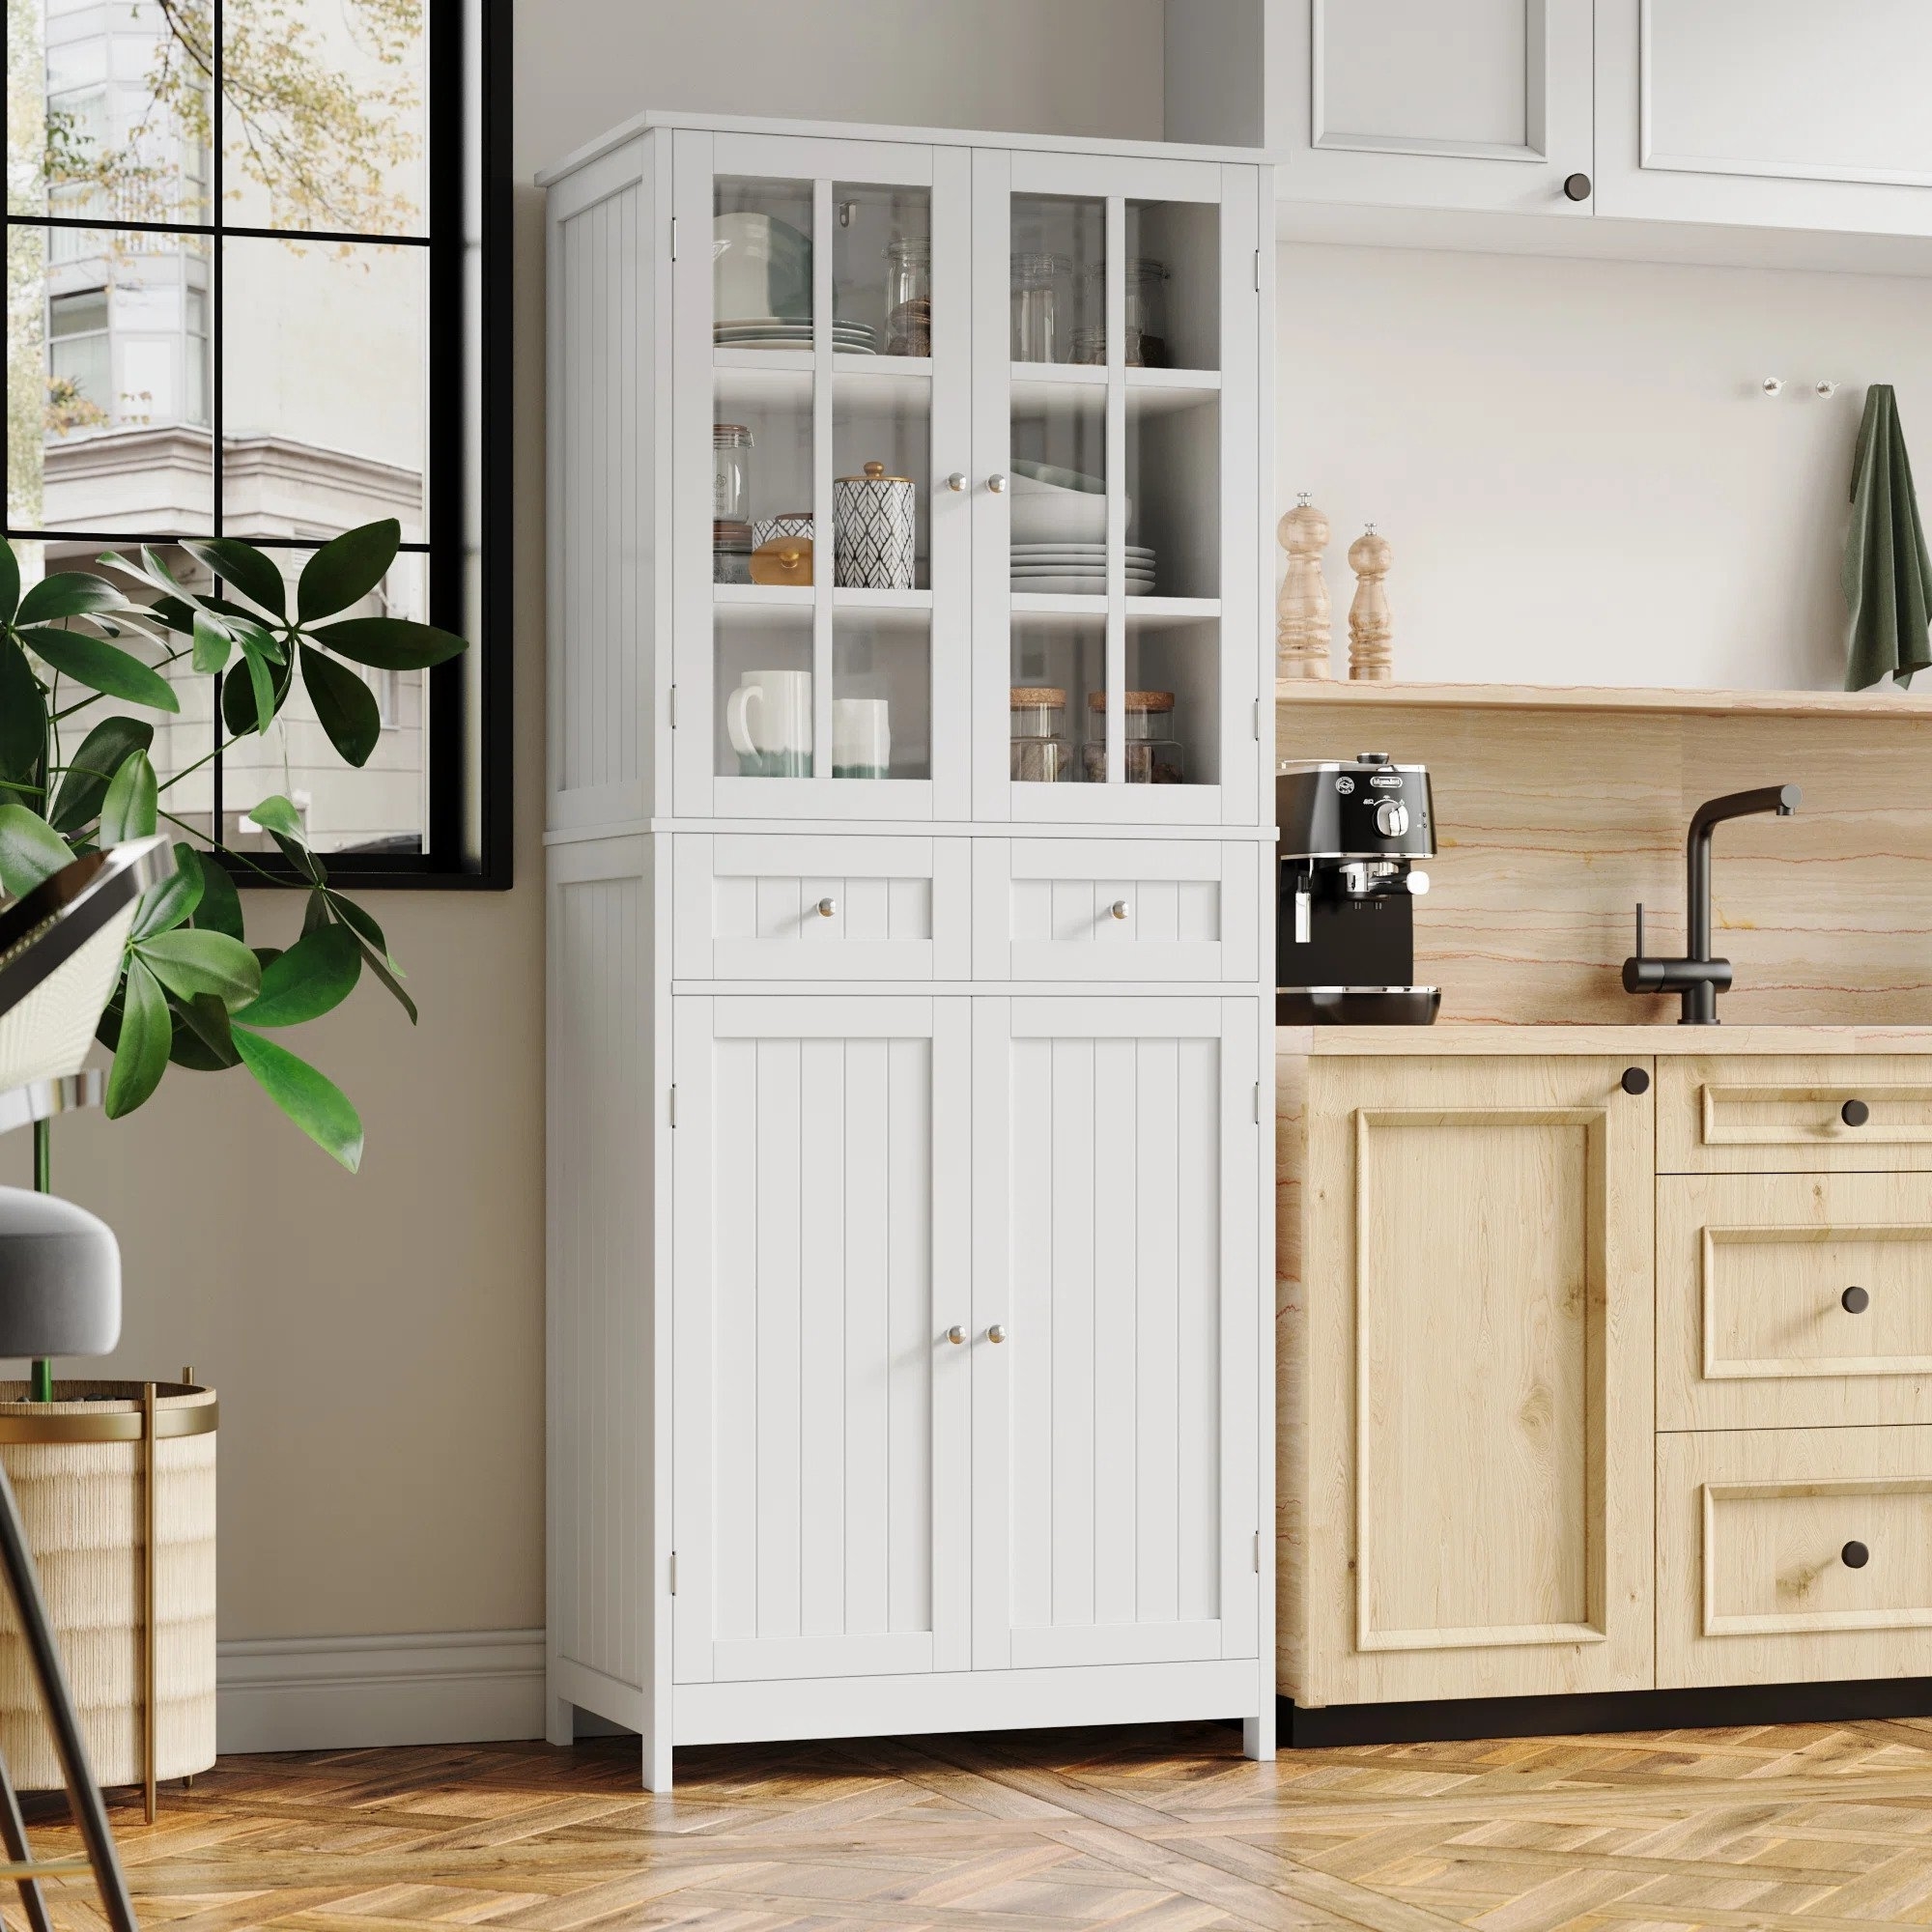 The white pantry with two cabinets and two drawers, featuring glass doors on the top half